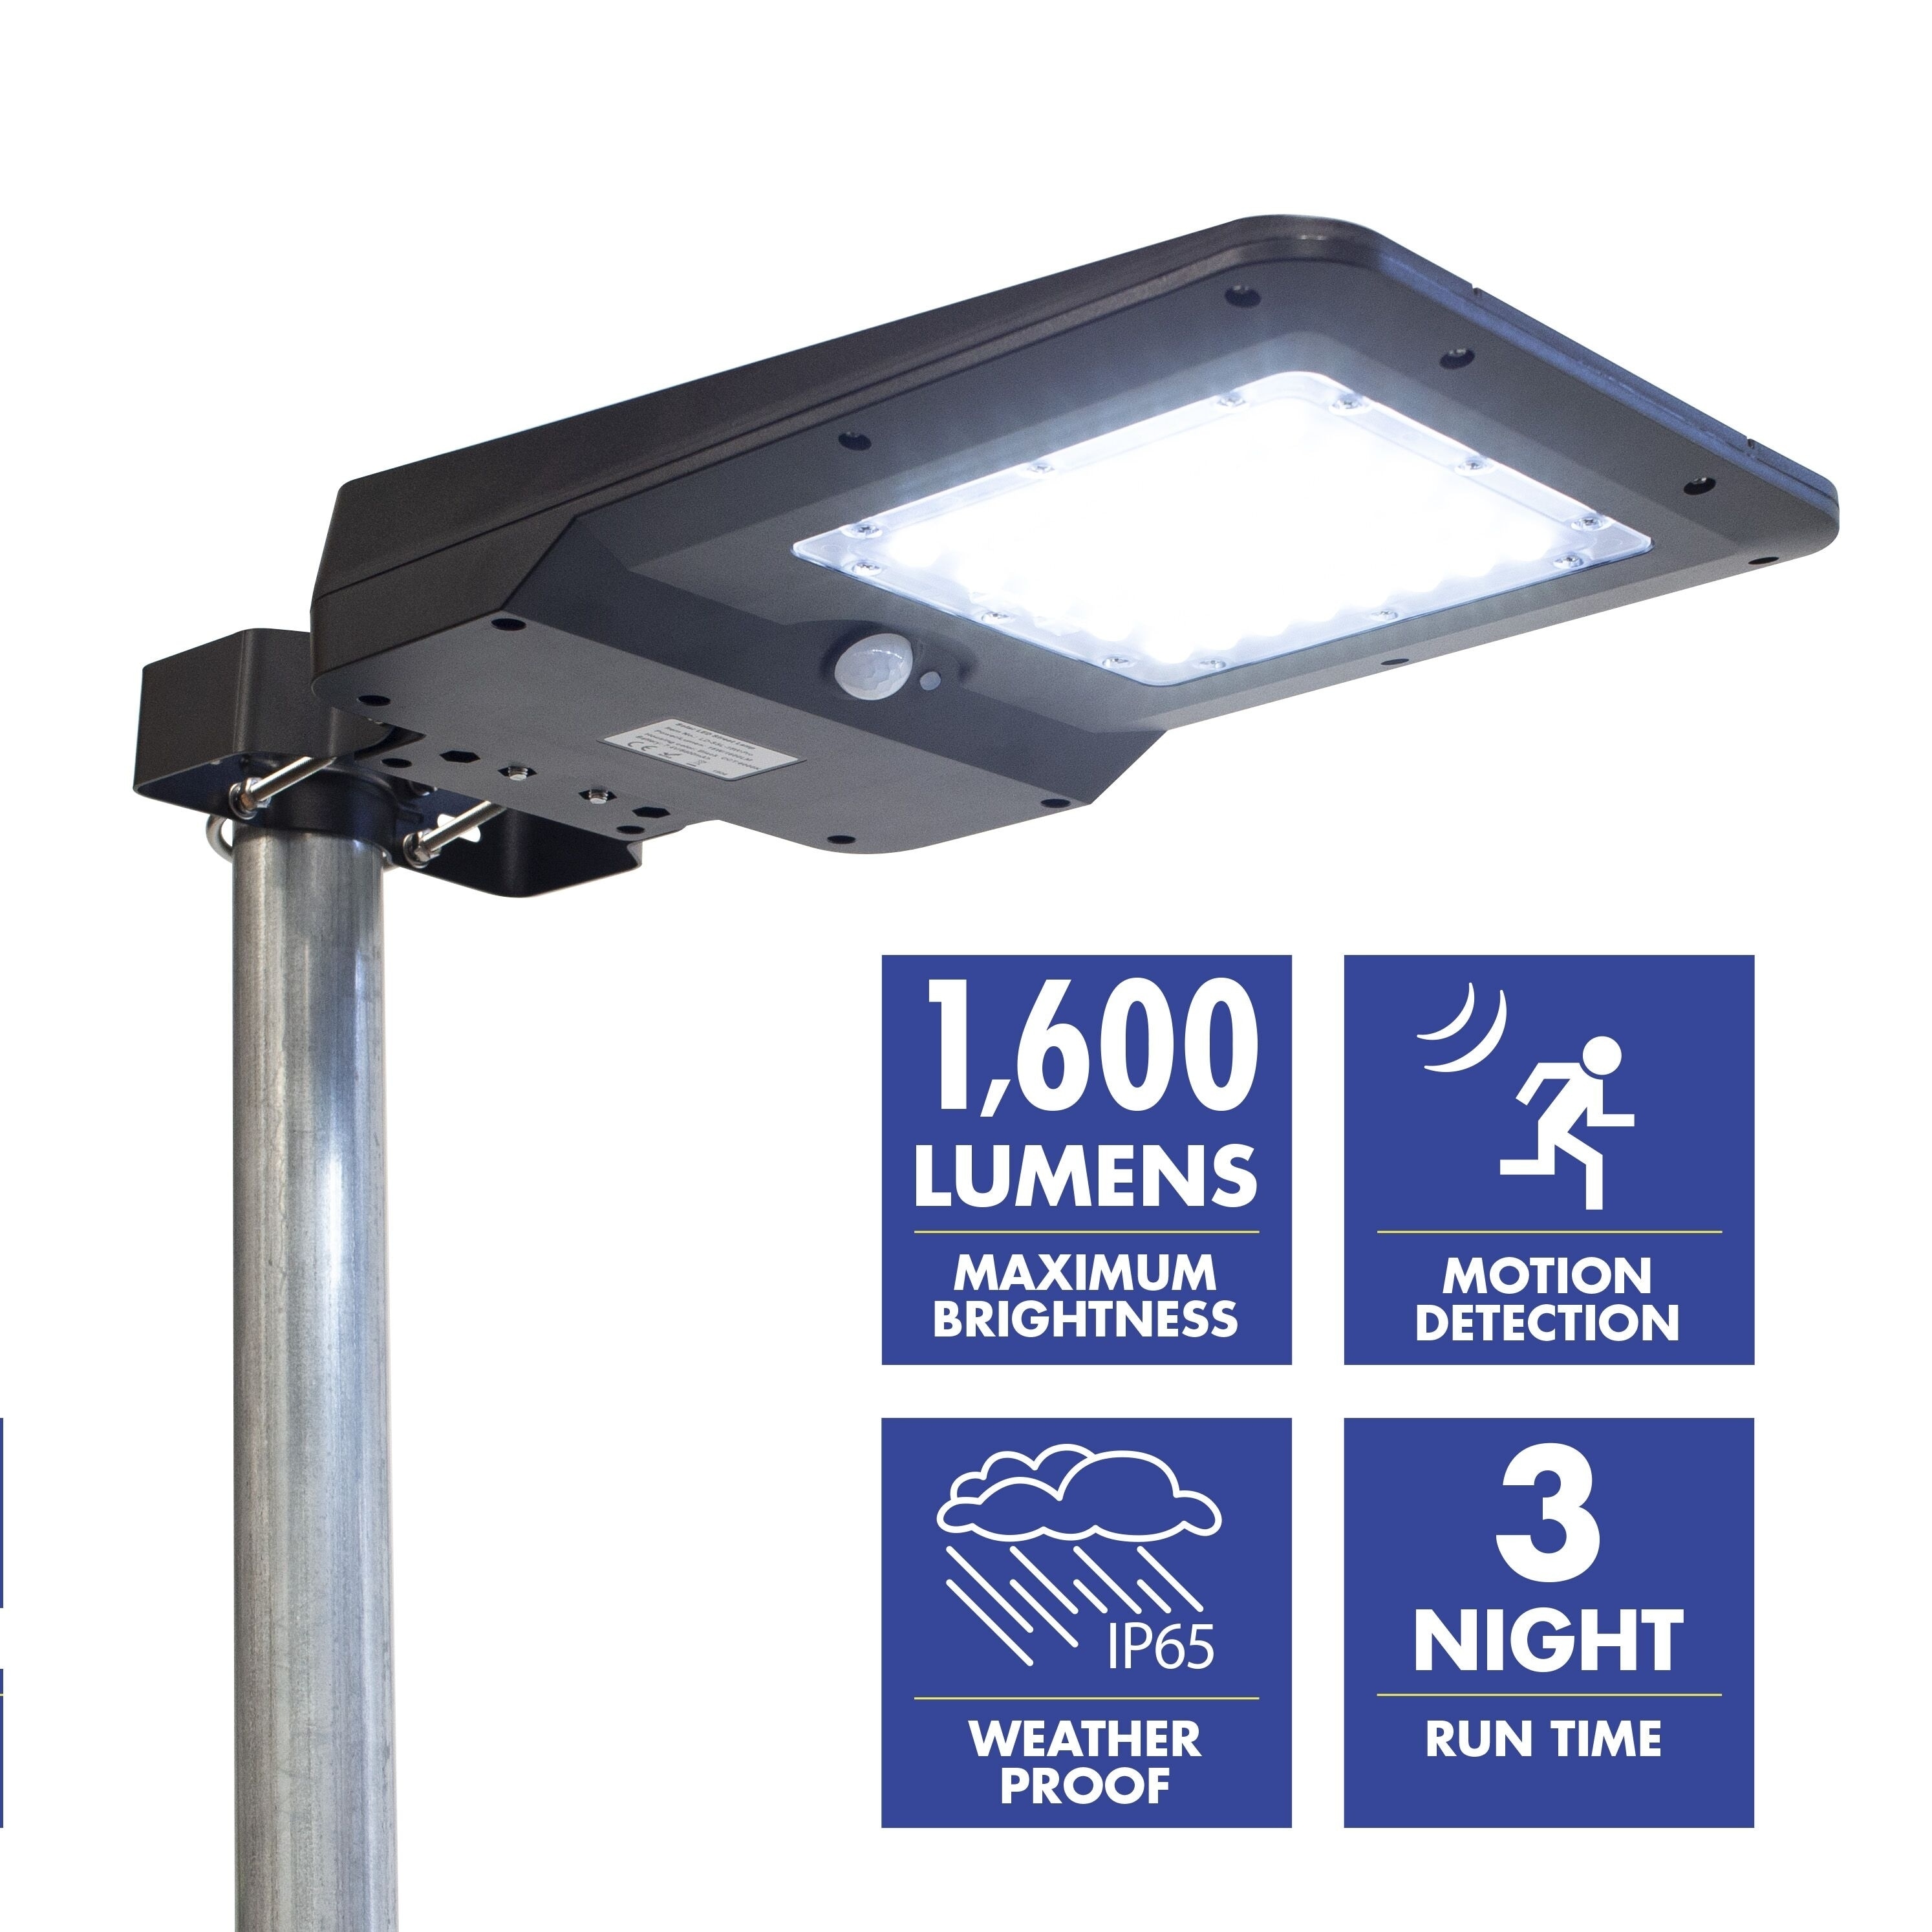 500W LED Solar Street Lights Outdoor， Dusk to Dawn Security Flood Light  with Remote Control ＆ Pole， Wireless， Waterproof， Perfect for Yard， Parking  l 最大の割引 DIY、工具